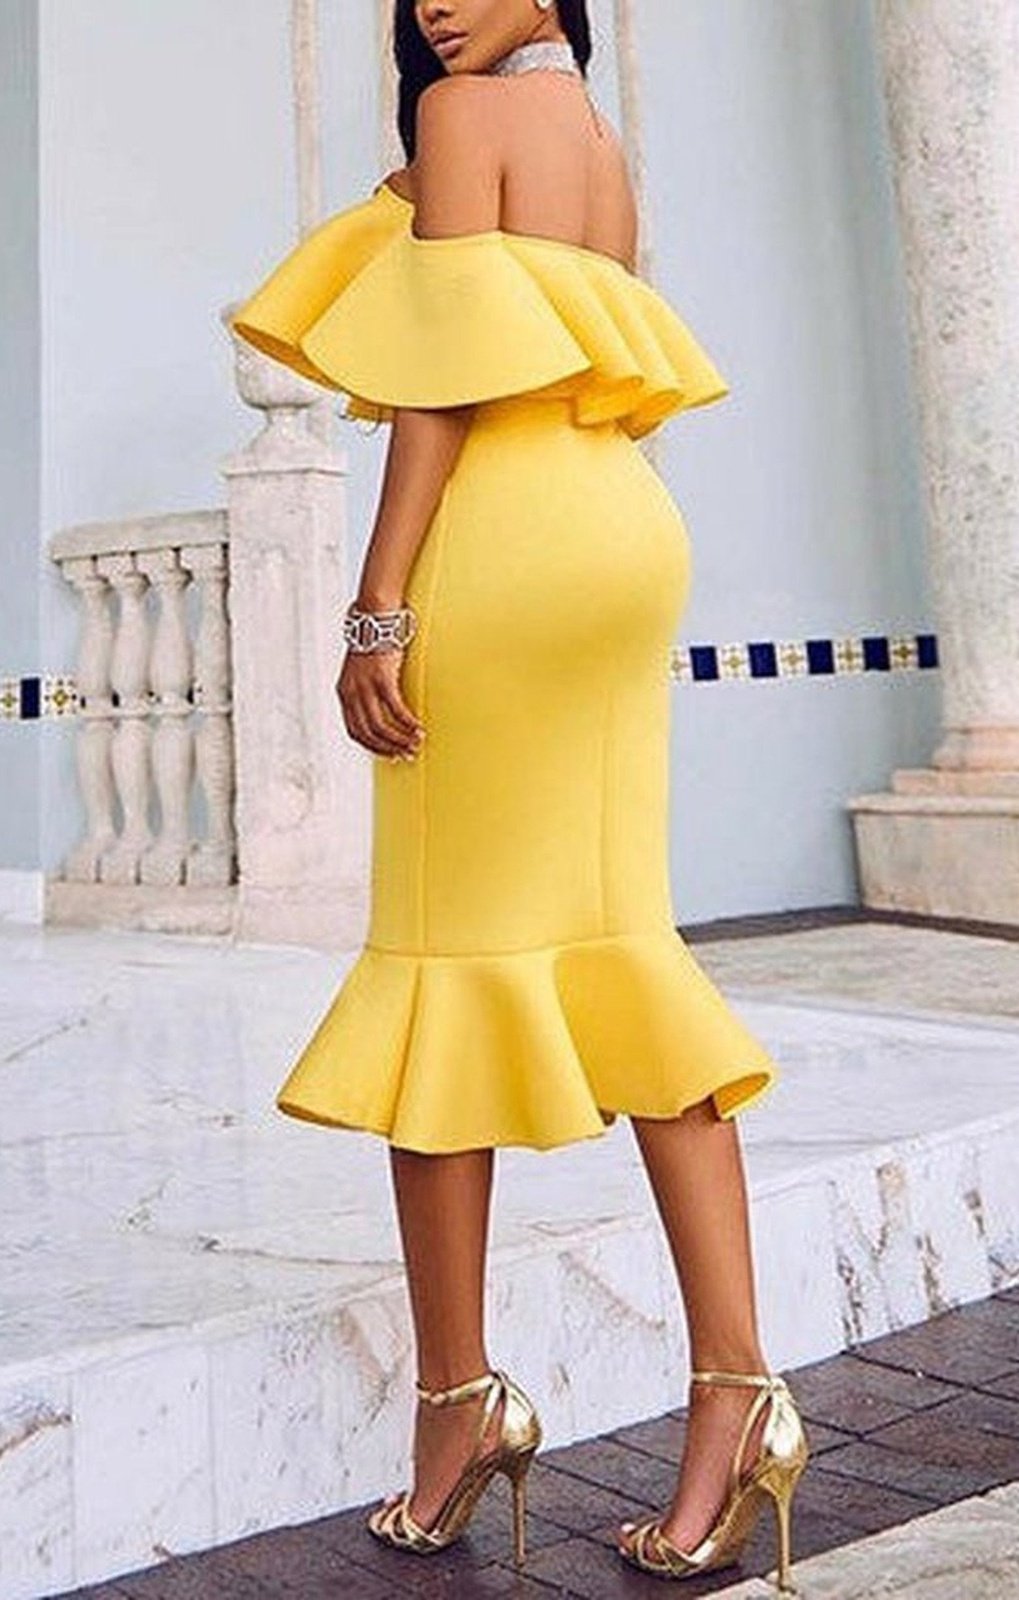 Off the Shoulder Pencil Dress - Ruffle Cuff and Hemline (MANY COLORS)